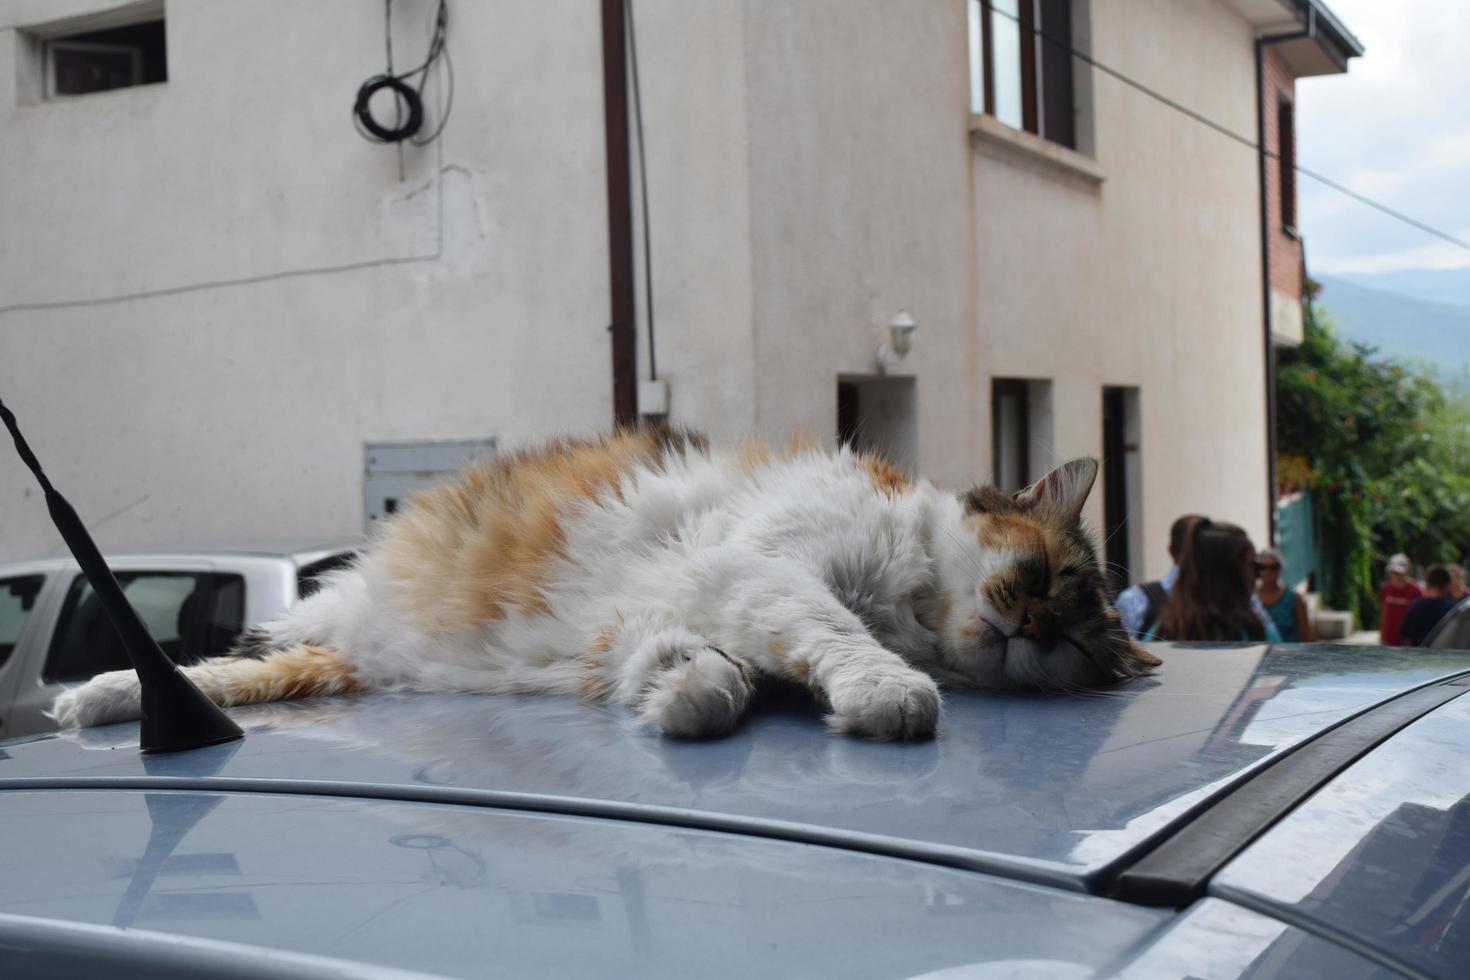 the cat sleeps on the roof of the car photo